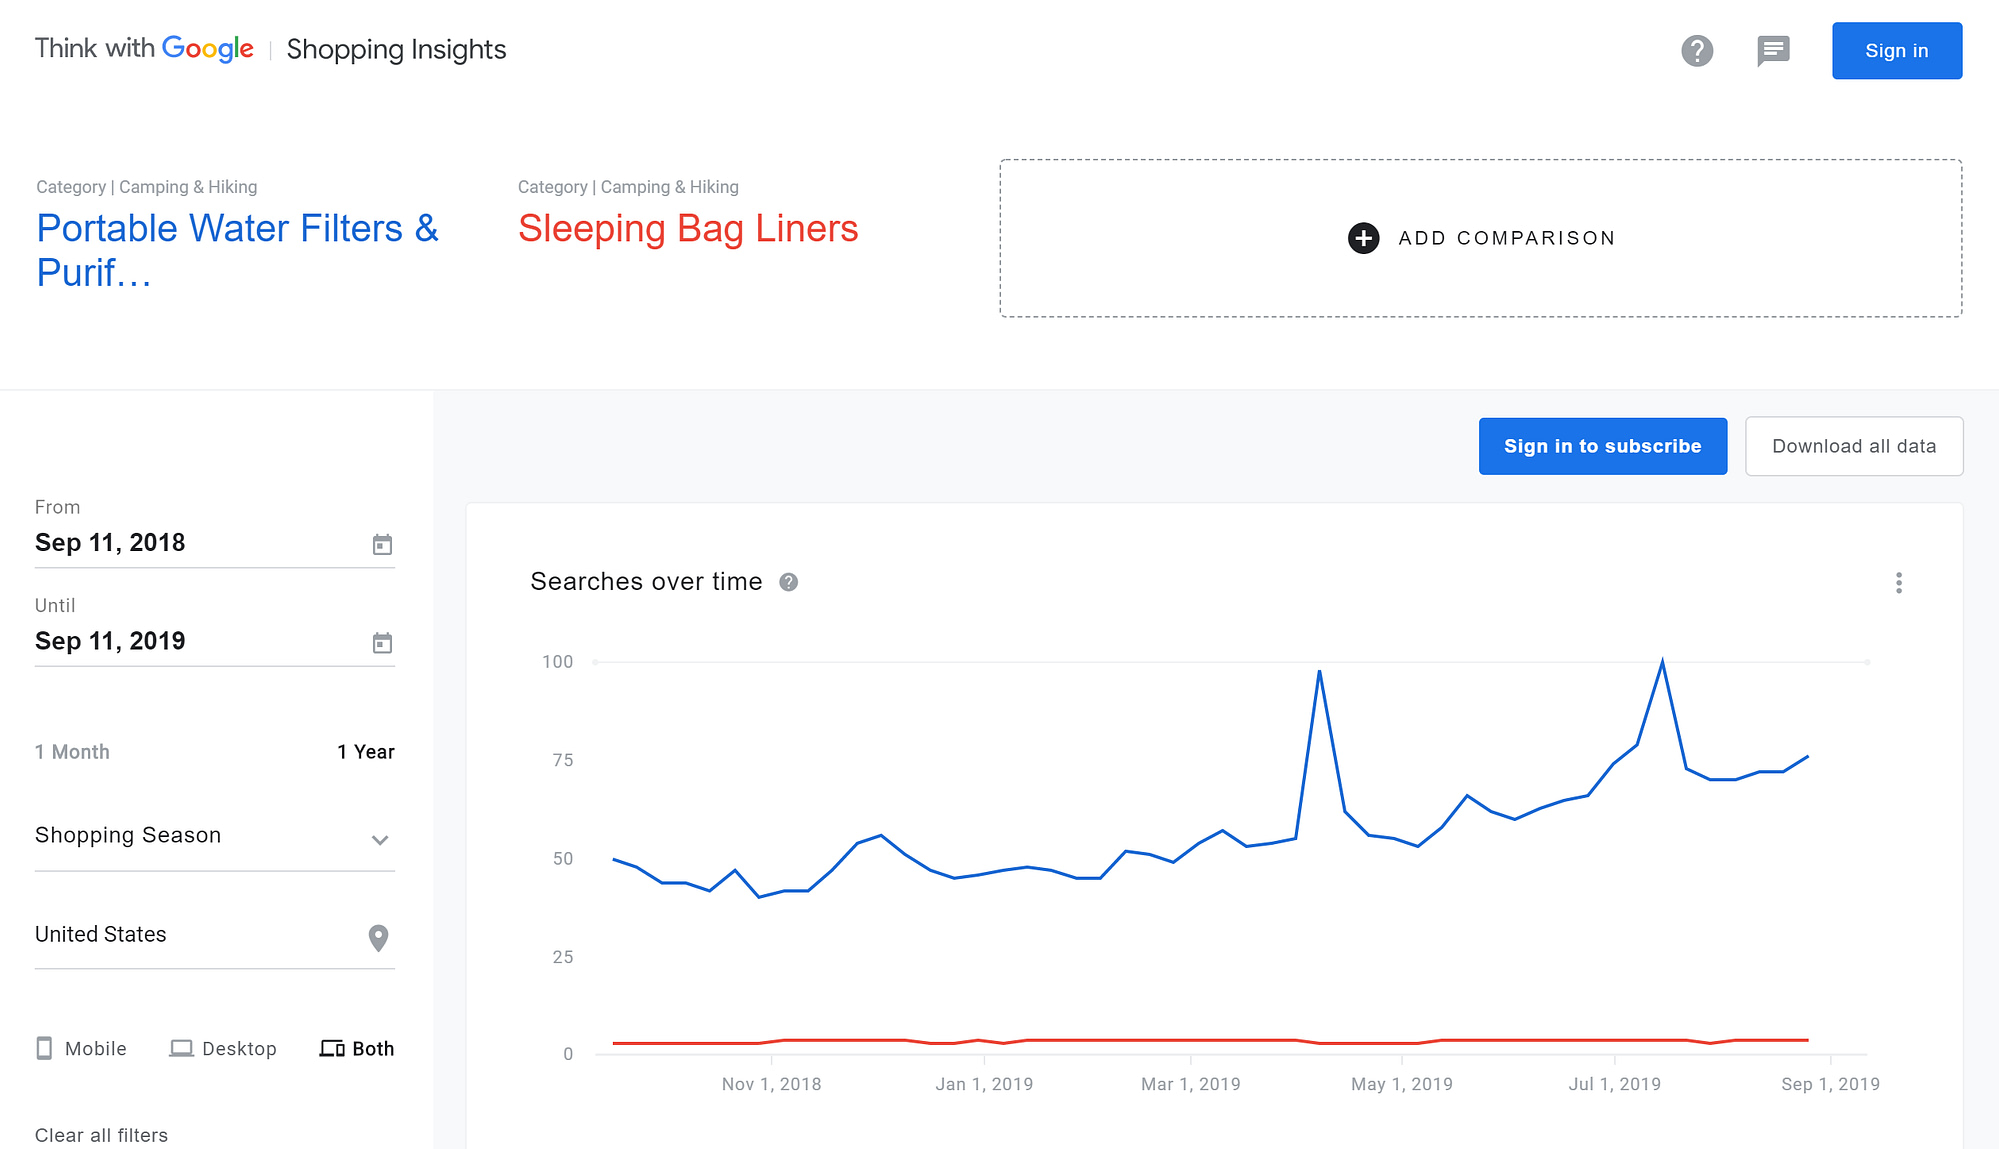 Google Shopping Insights helps you find what to sell online